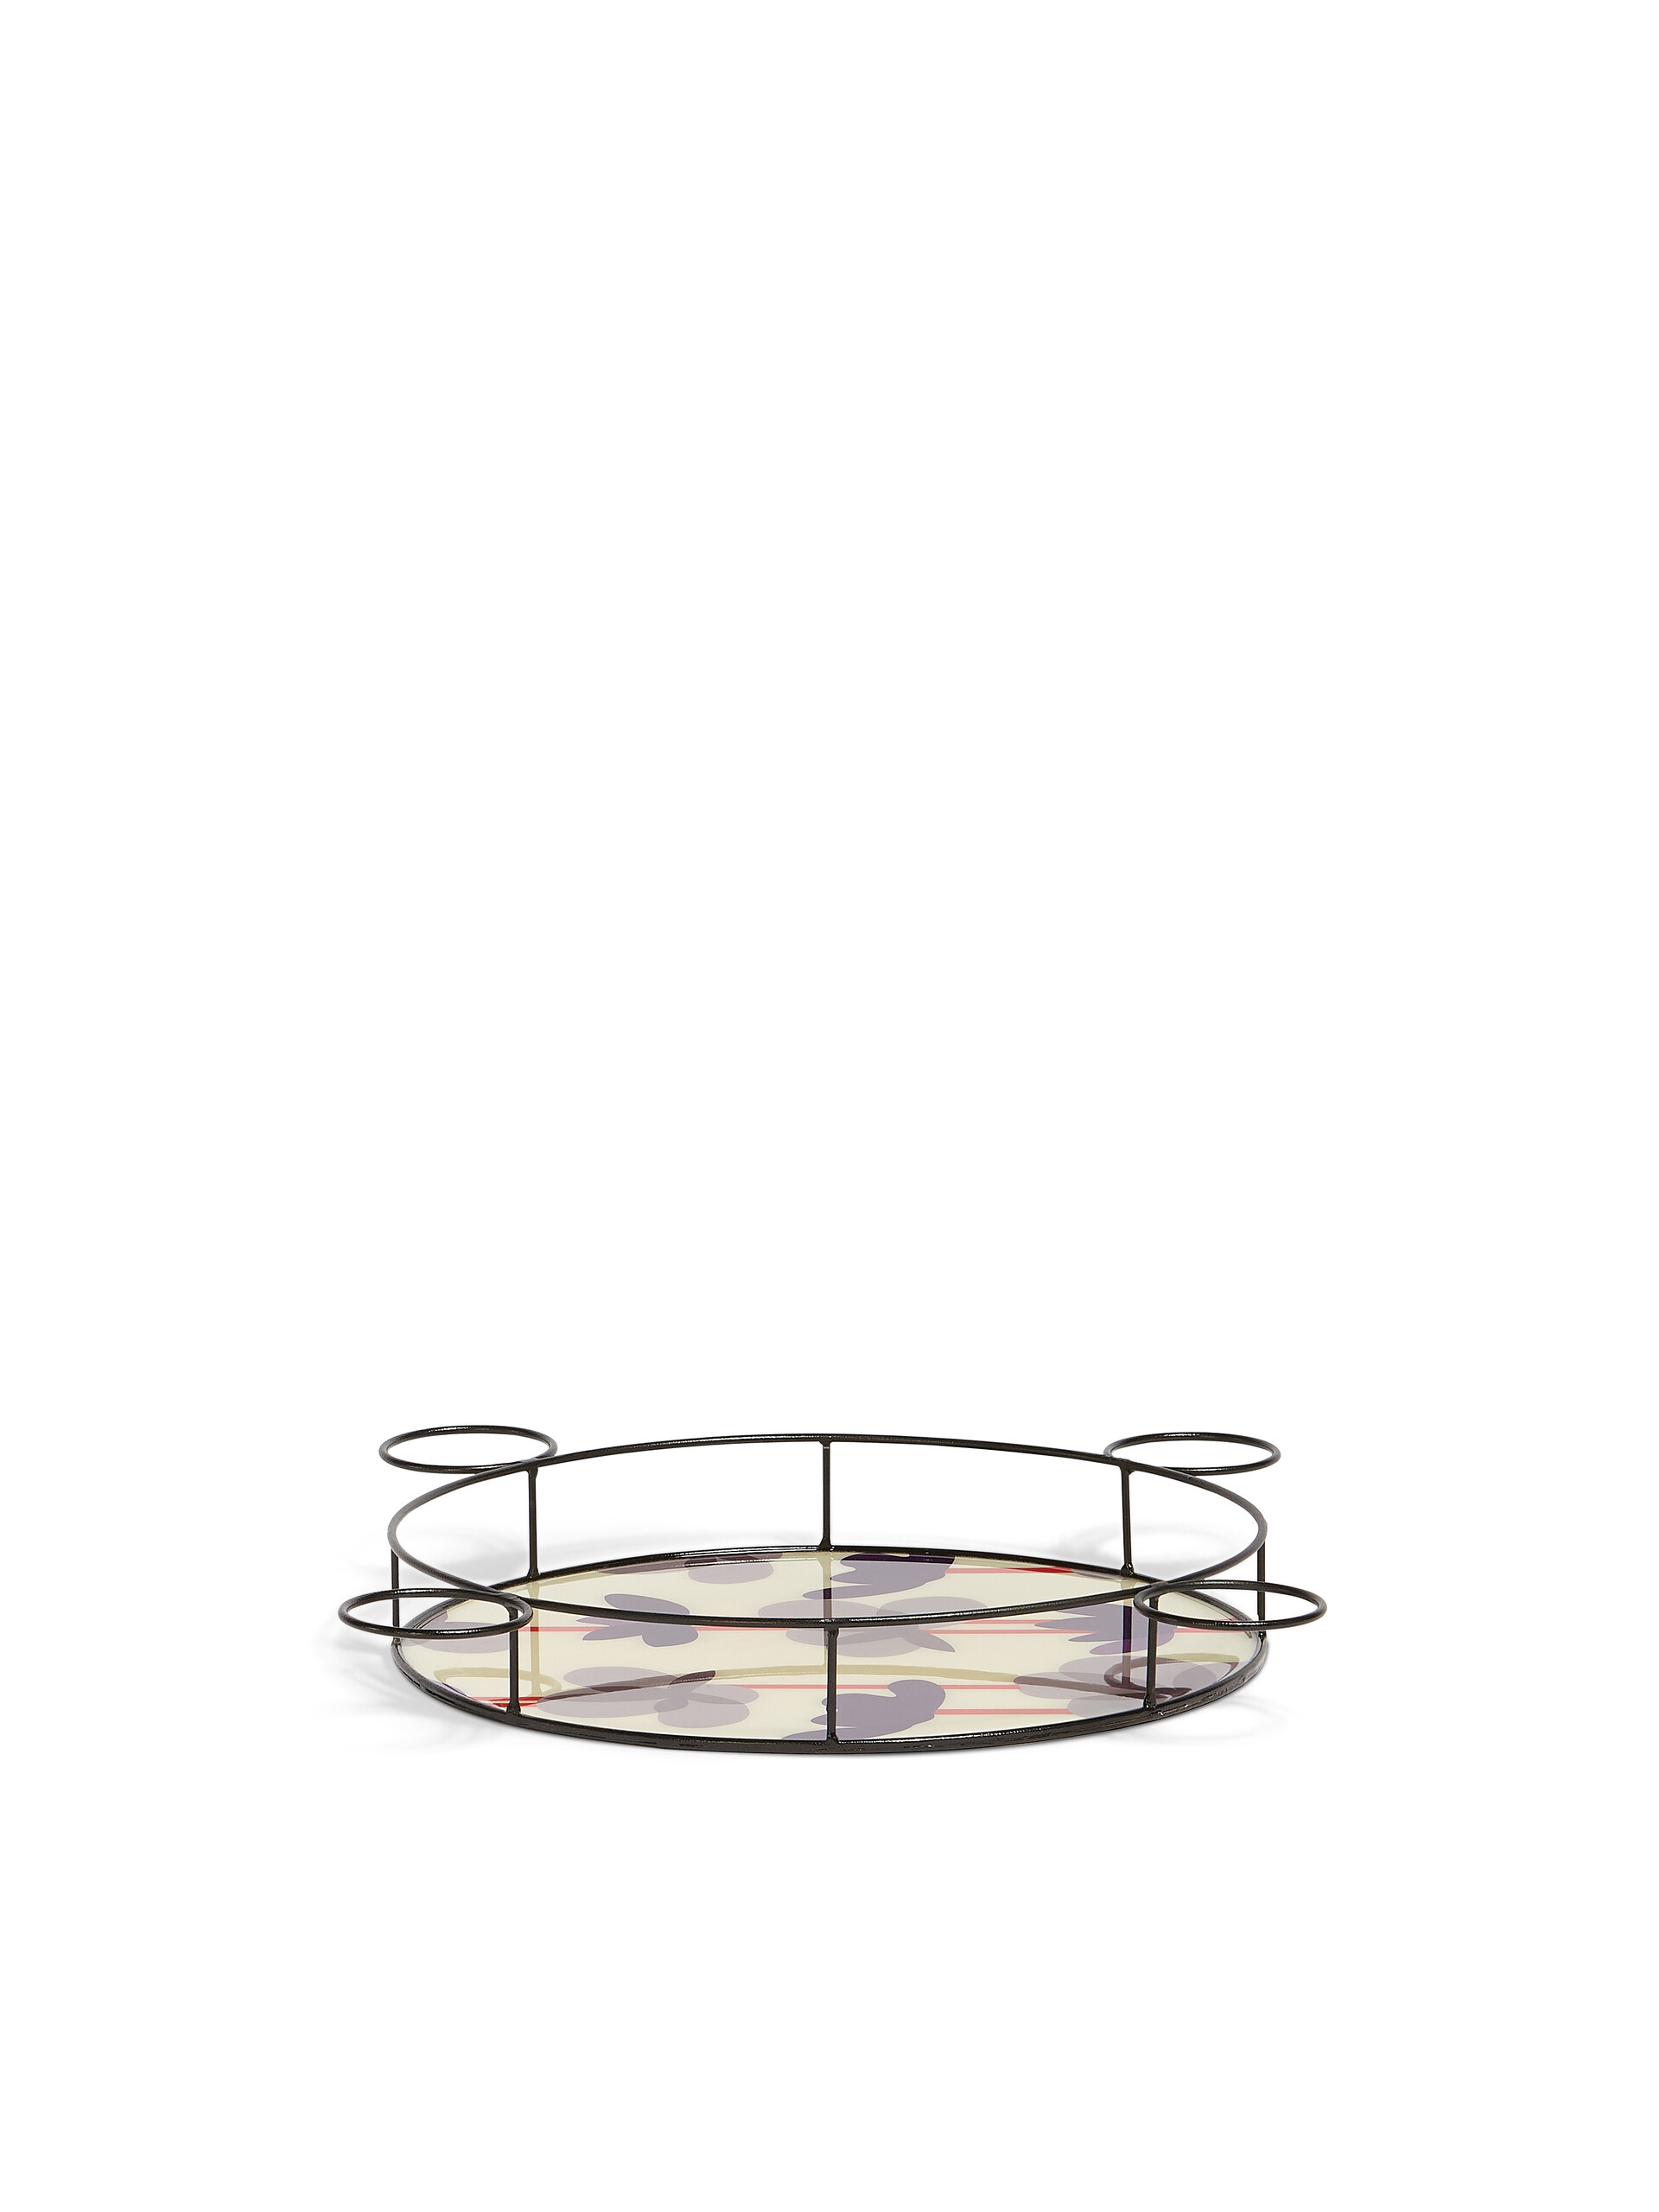 MARNI MARKET round tray in iron and flower resin - Accessories - Image 2